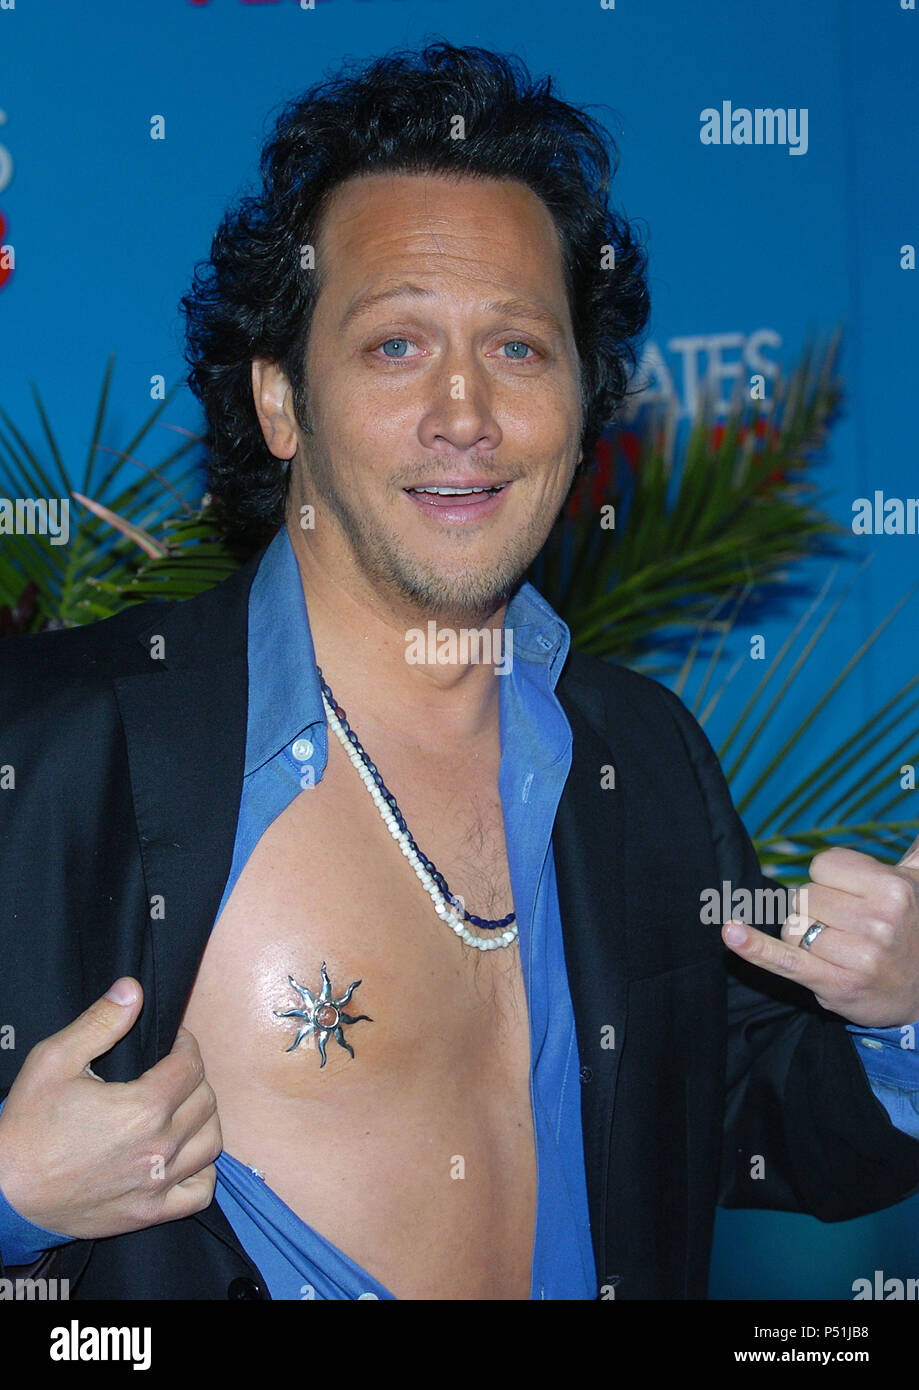 Rob Schneider arriving at the premiere of ' The 50 First Dates ' at the Westwood Village theatre in los Angeles. February 3, 2004.SchneiderRob026 Red Carpet Event, Vertical, USA, Film Industry, Celebrities,  Photography, Bestof, Arts Culture and Entertainment, Topix Celebrities fashion /  Vertical, Best of, Event in Hollywood Life - California,  Red Carpet and backstage, USA, Film Industry, Celebrities,  movie celebrities, TV celebrities, Music celebrities, Photography, Bestof, Arts Culture and Entertainment,  Topix, vertical, one person,, from the years , 2003 to 2005, inquiry tsuni@Gamma-USA Stock Photo